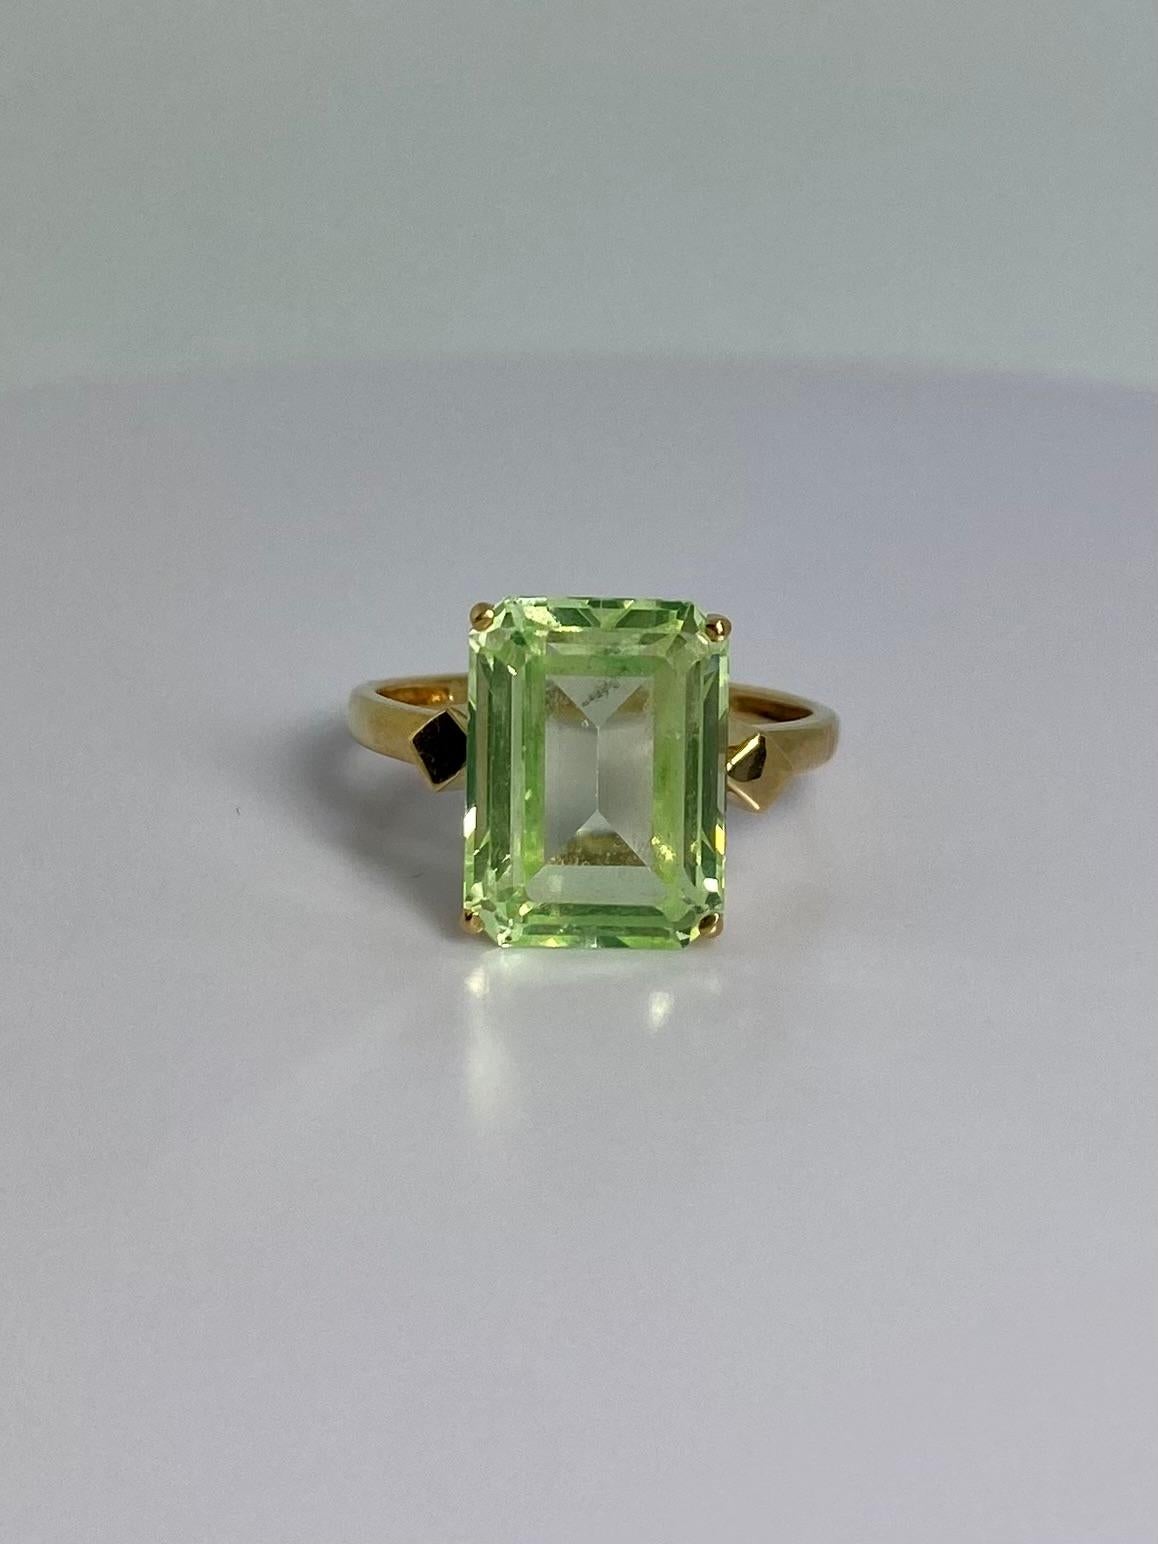 Beautiful ring from the end of 1950S is made of 18 carat yellow gold with a peridot in the center. Elegant pre-loved piece of jewelry with a stunning green peridot! This  ring weighs about 2.75 grams and has a ring size 6.5 (US), 6.50 (EUR), M (UK).